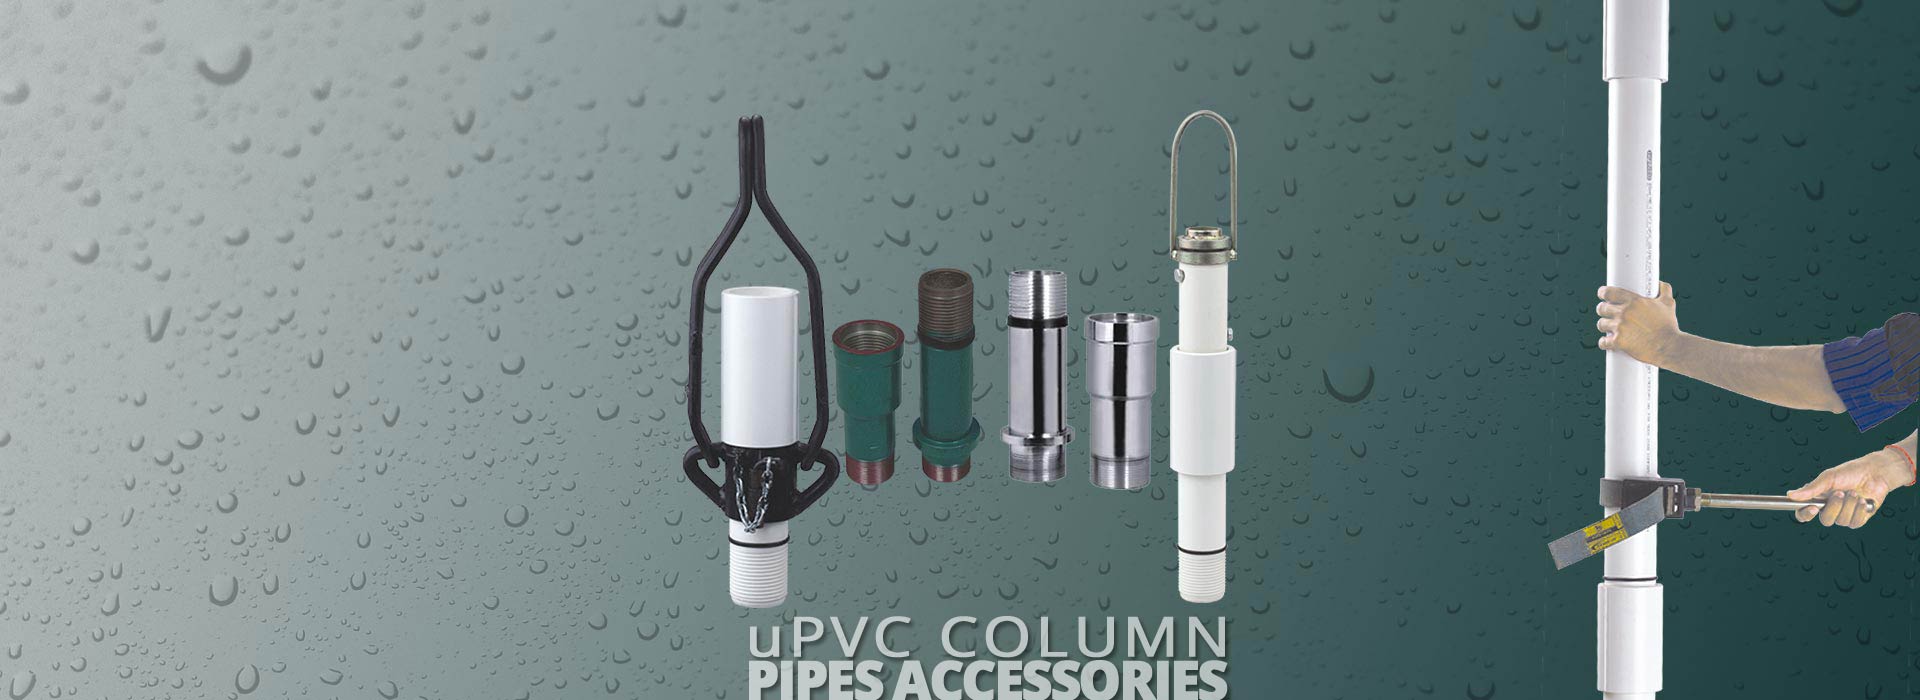 uPVC Column Pipes Accessories from Captain Pipes Ltd.